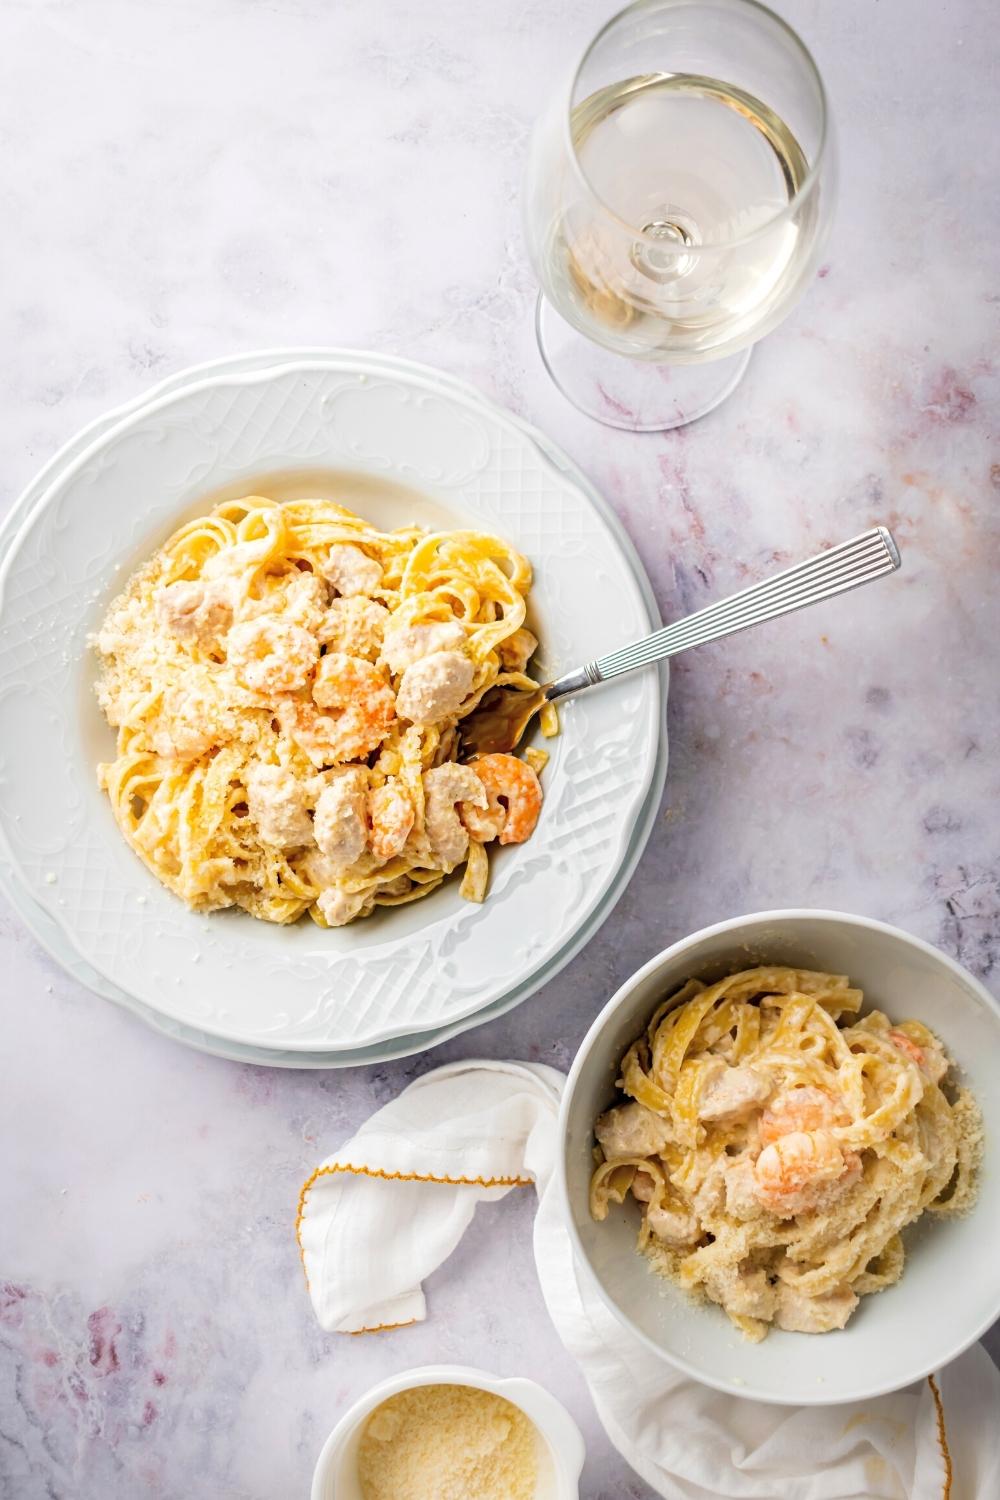 Chicken and shrimp Alfredo in a white dish with a bowl of chicken and shrimp Alfredo in front of it and a glass of wine all on a gray counter.